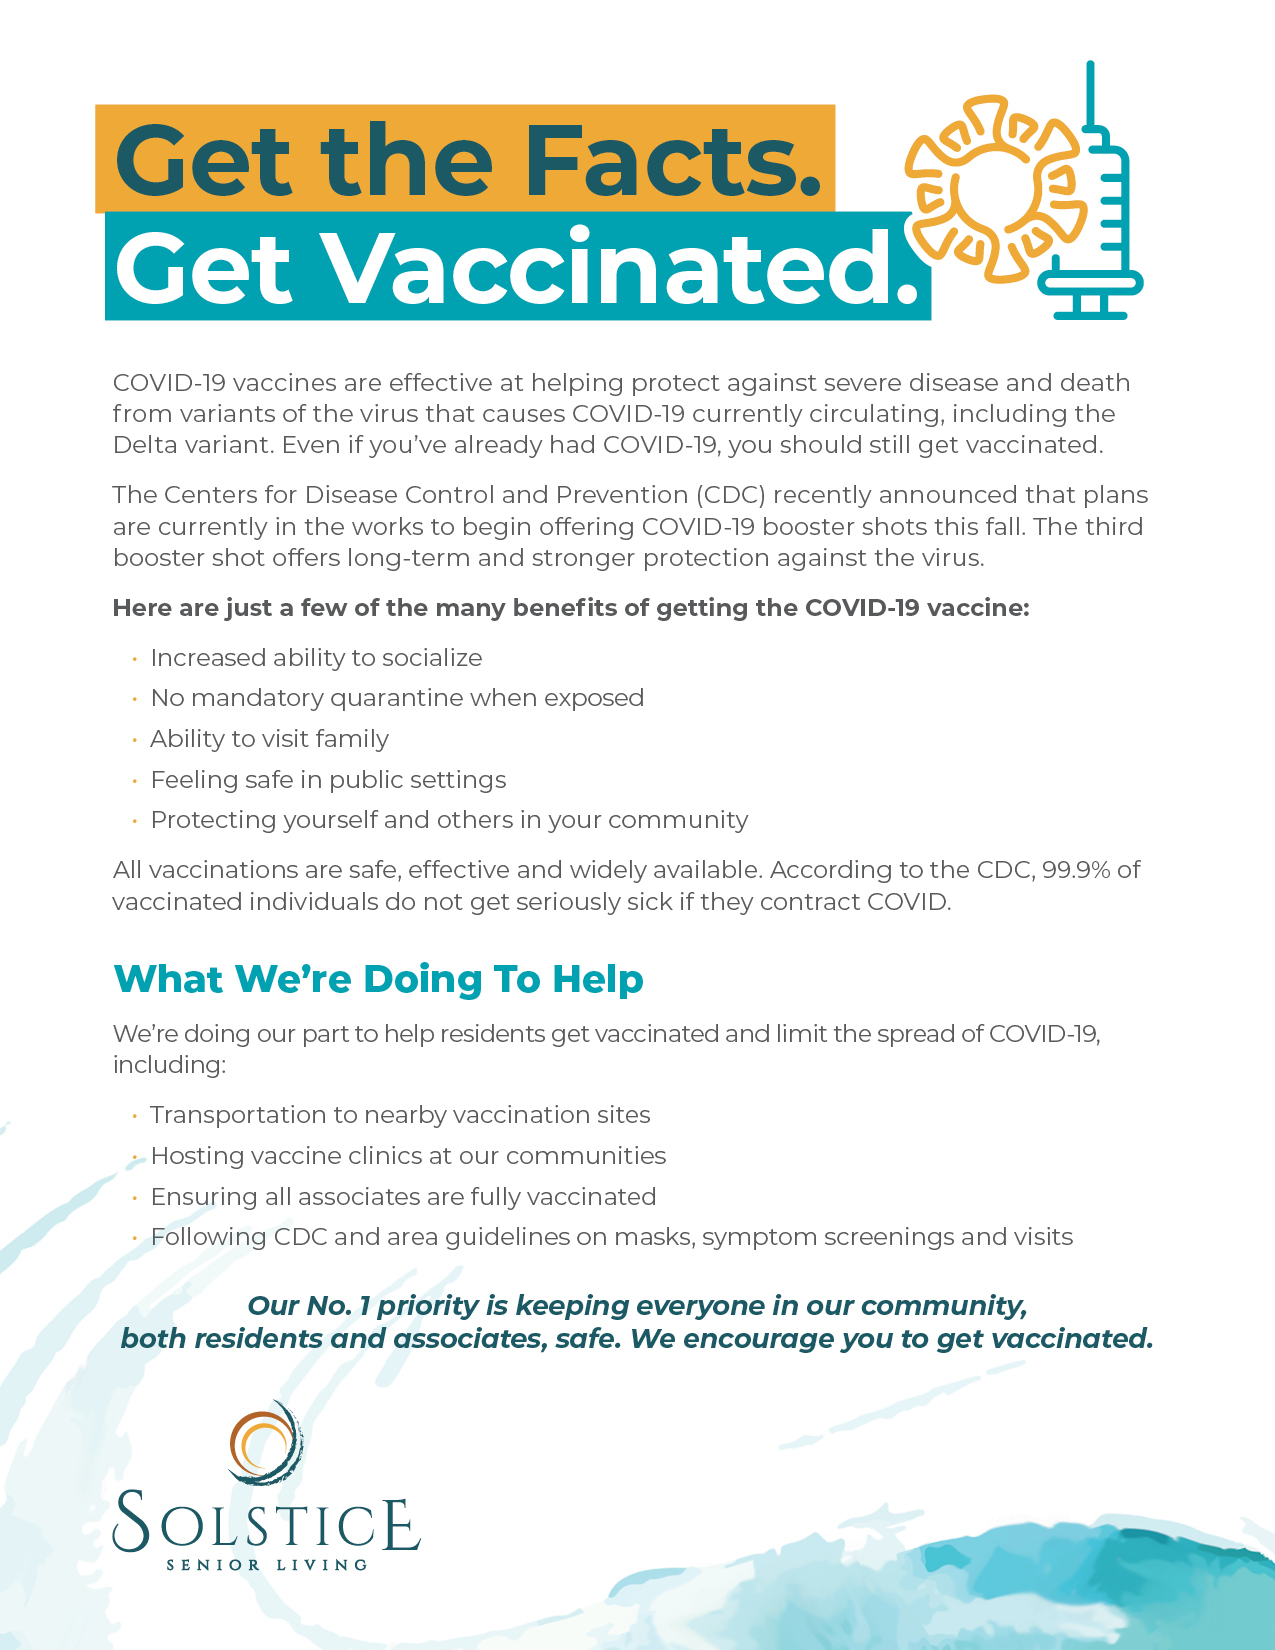 Get the Facts / Get Vaccinated Flyer Template